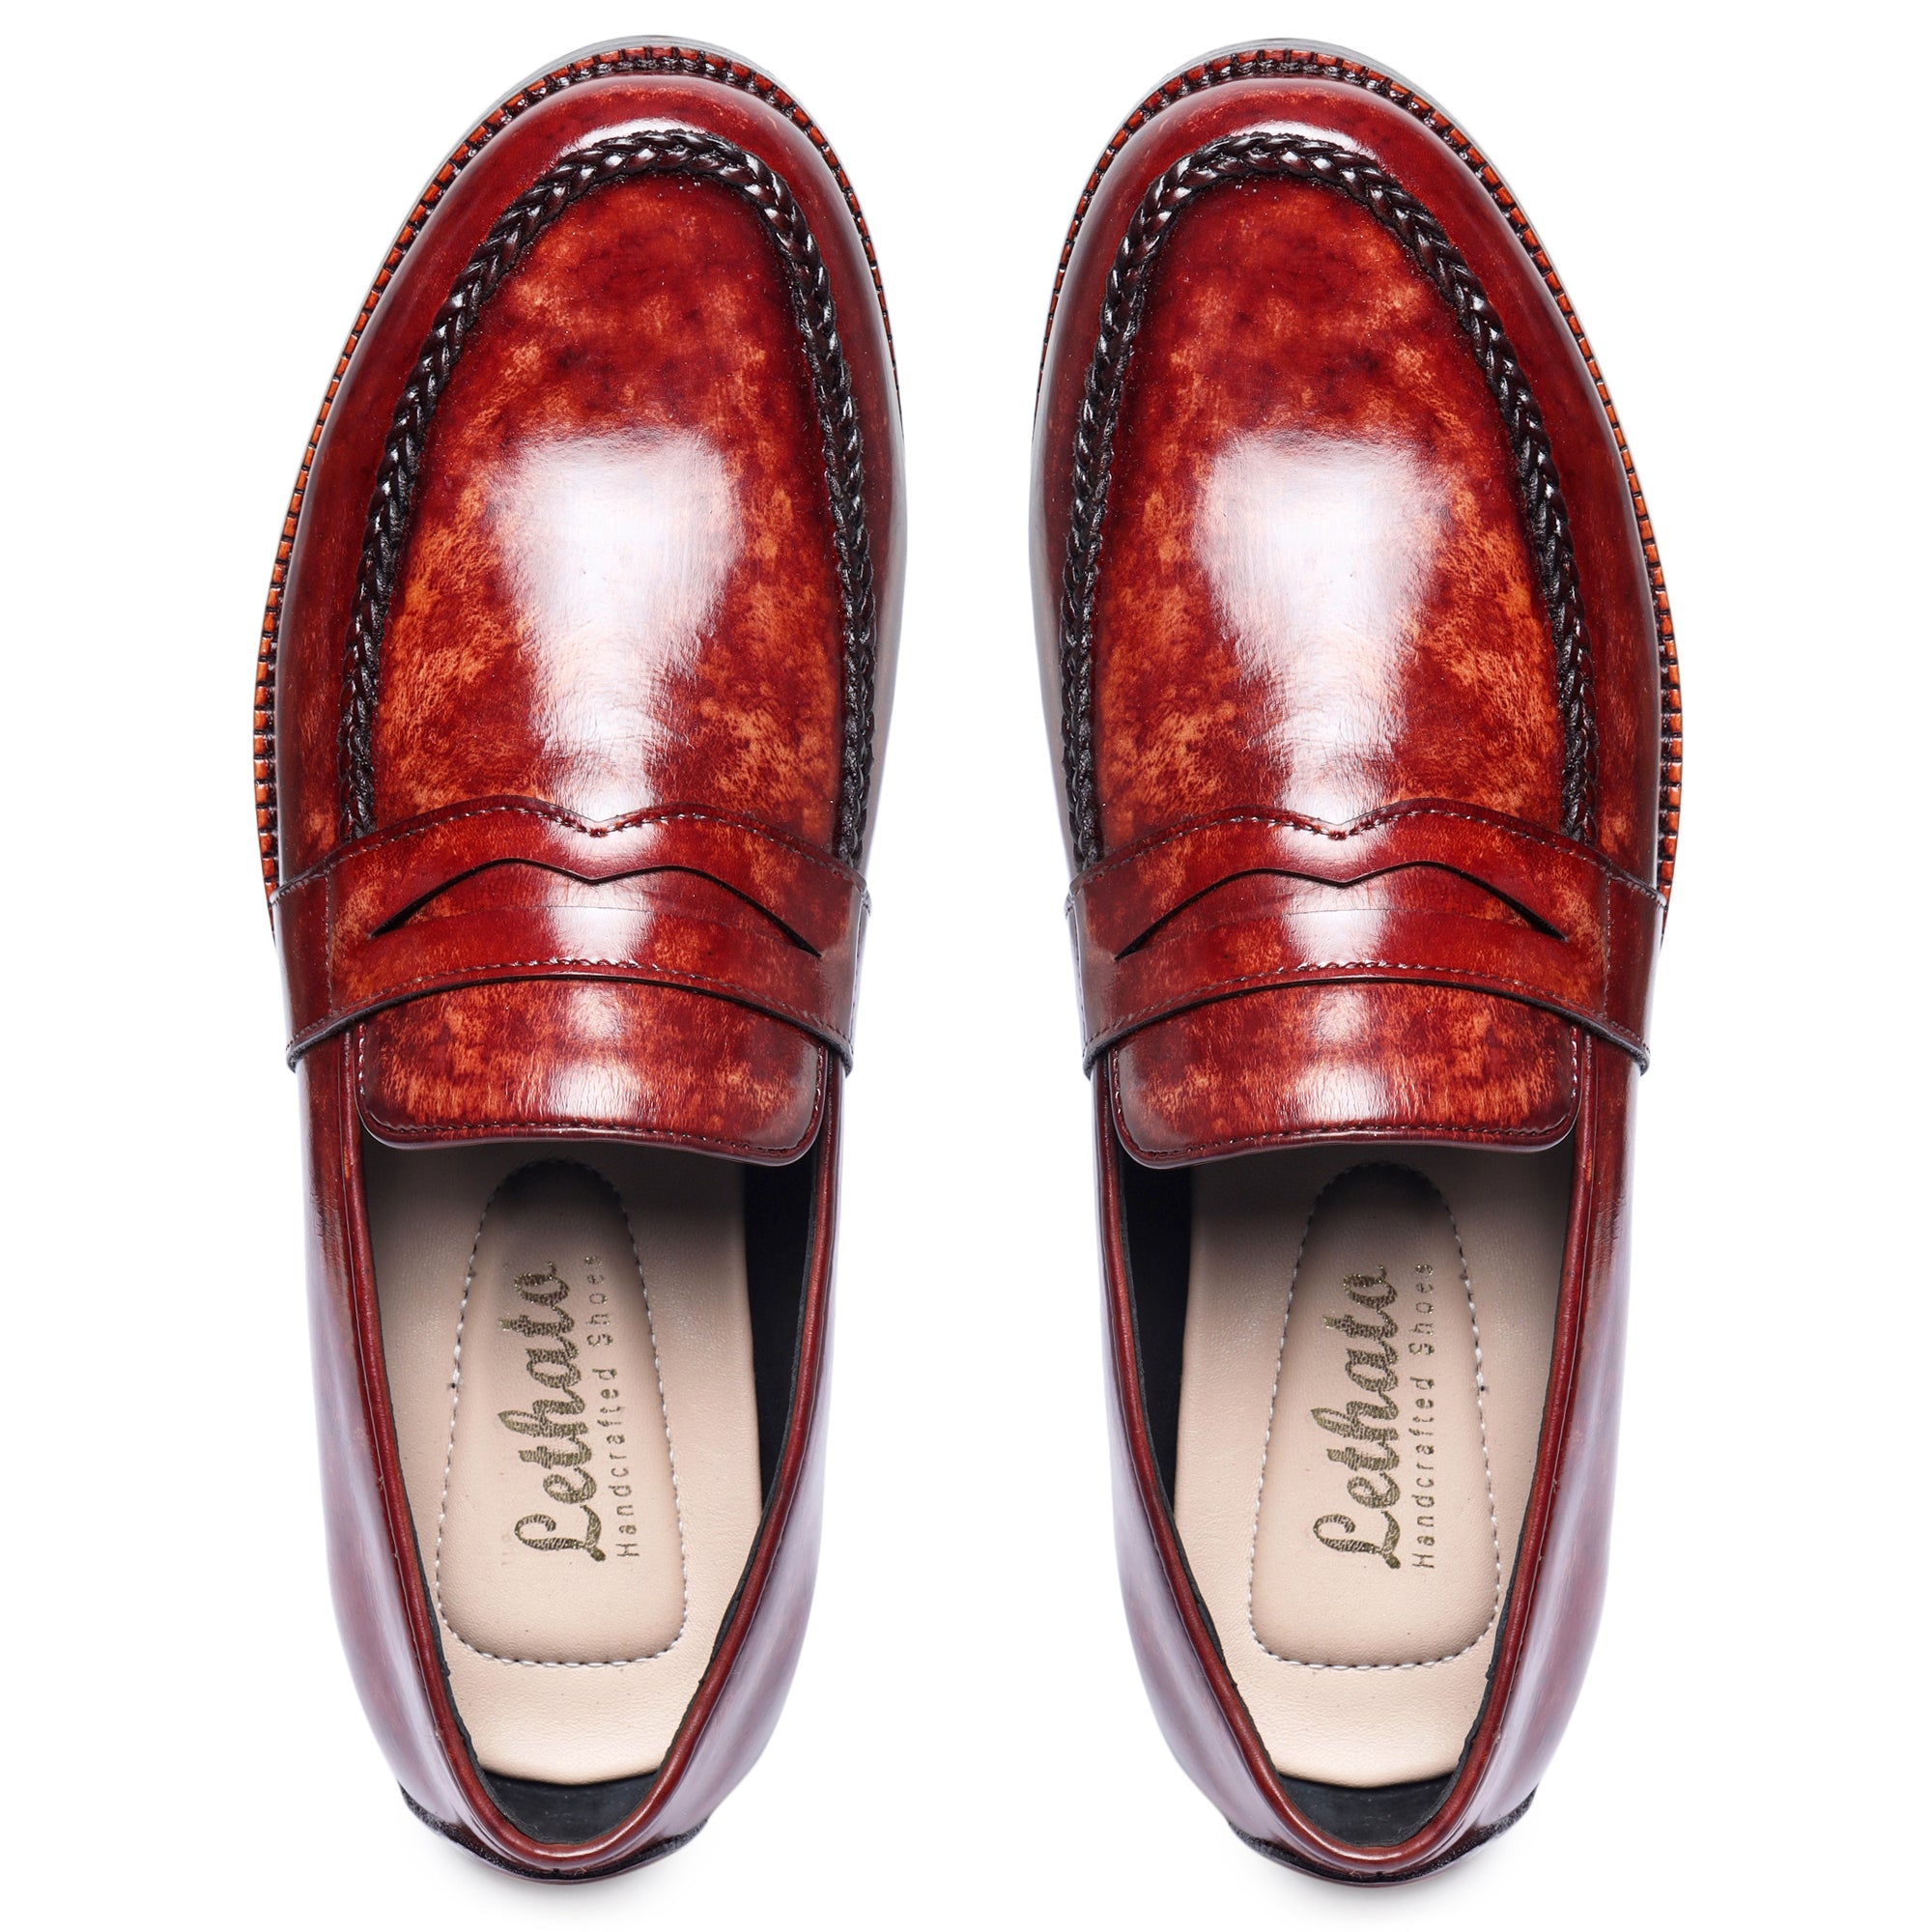 Handcrafted Men' s Penny, Tassel & Venetian Loafer Shoes | Lethato